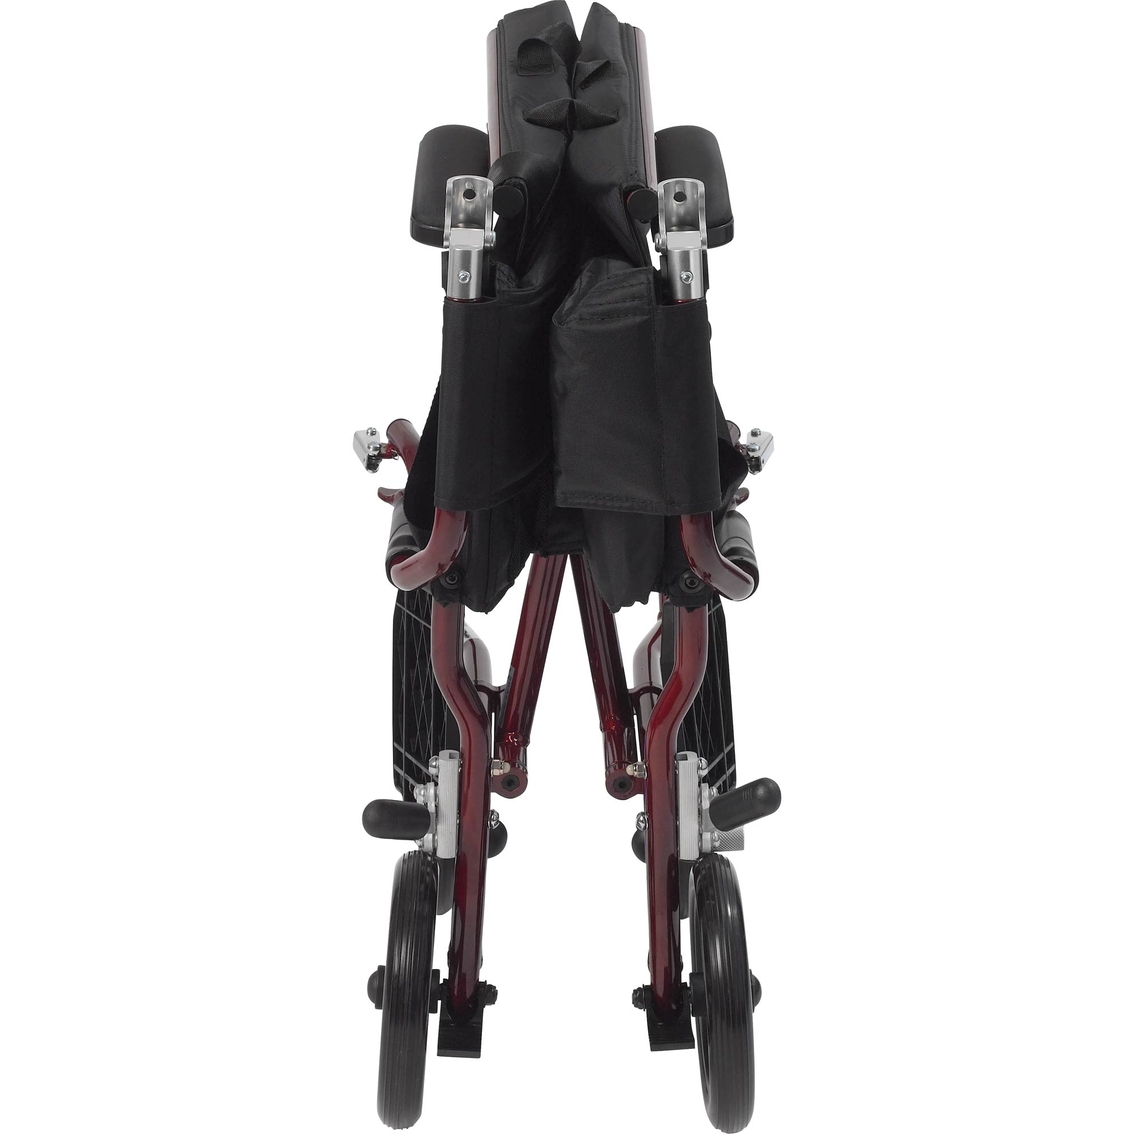 Drive Medical Fly Lite Ultra Lightweight Transport Wheelchair - Image 3 of 4